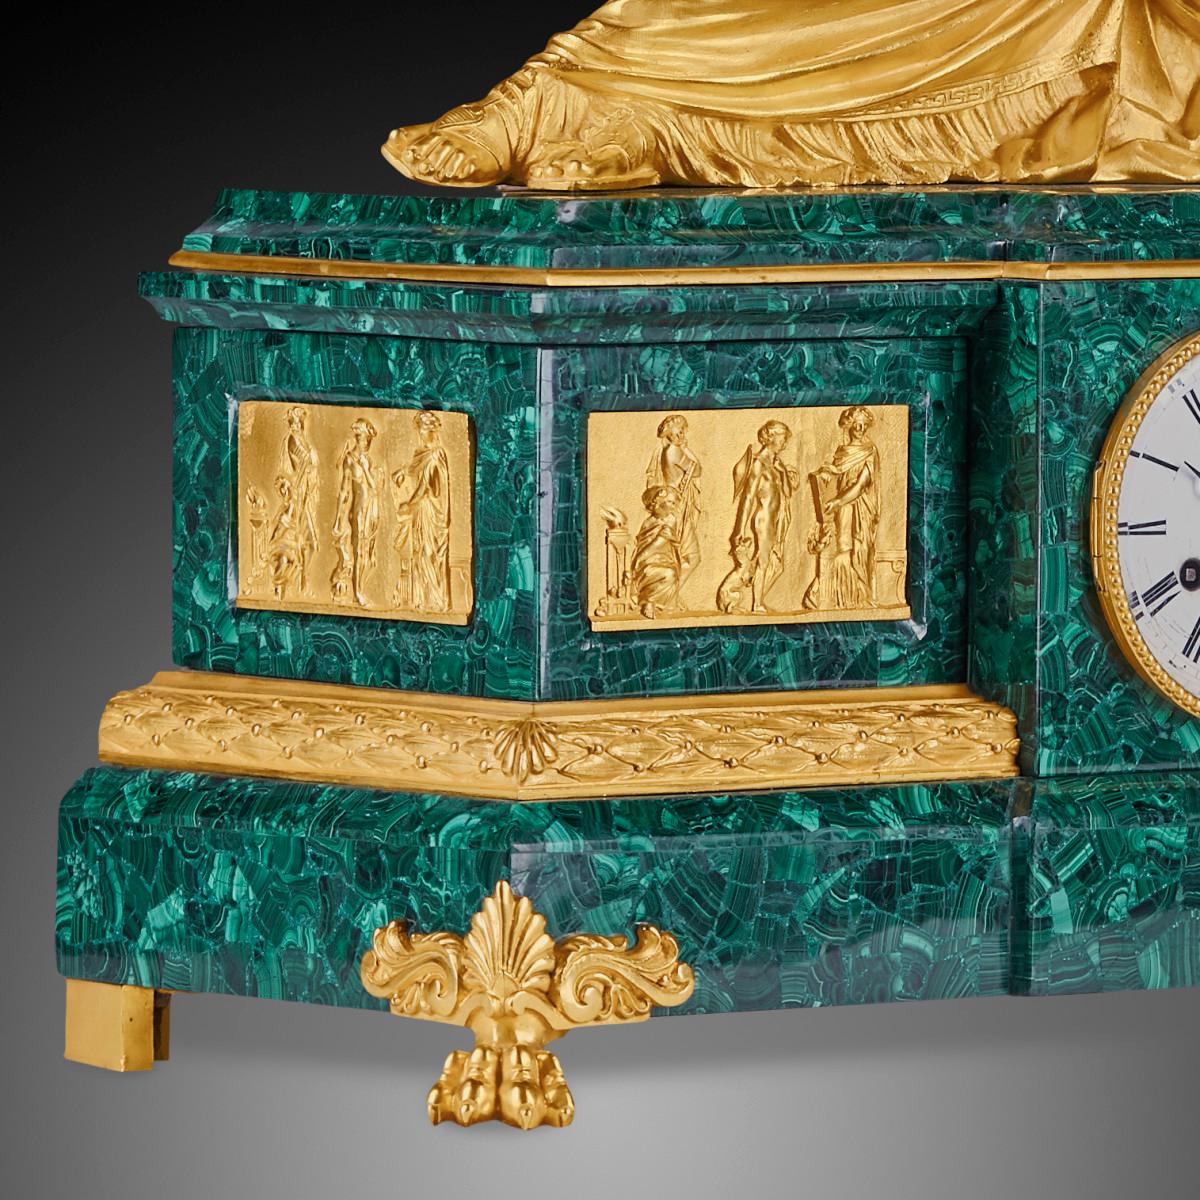 Gilt BY BARRARD DE PARIS A of mantel clock in the style of Napoleon III, the 19th cen